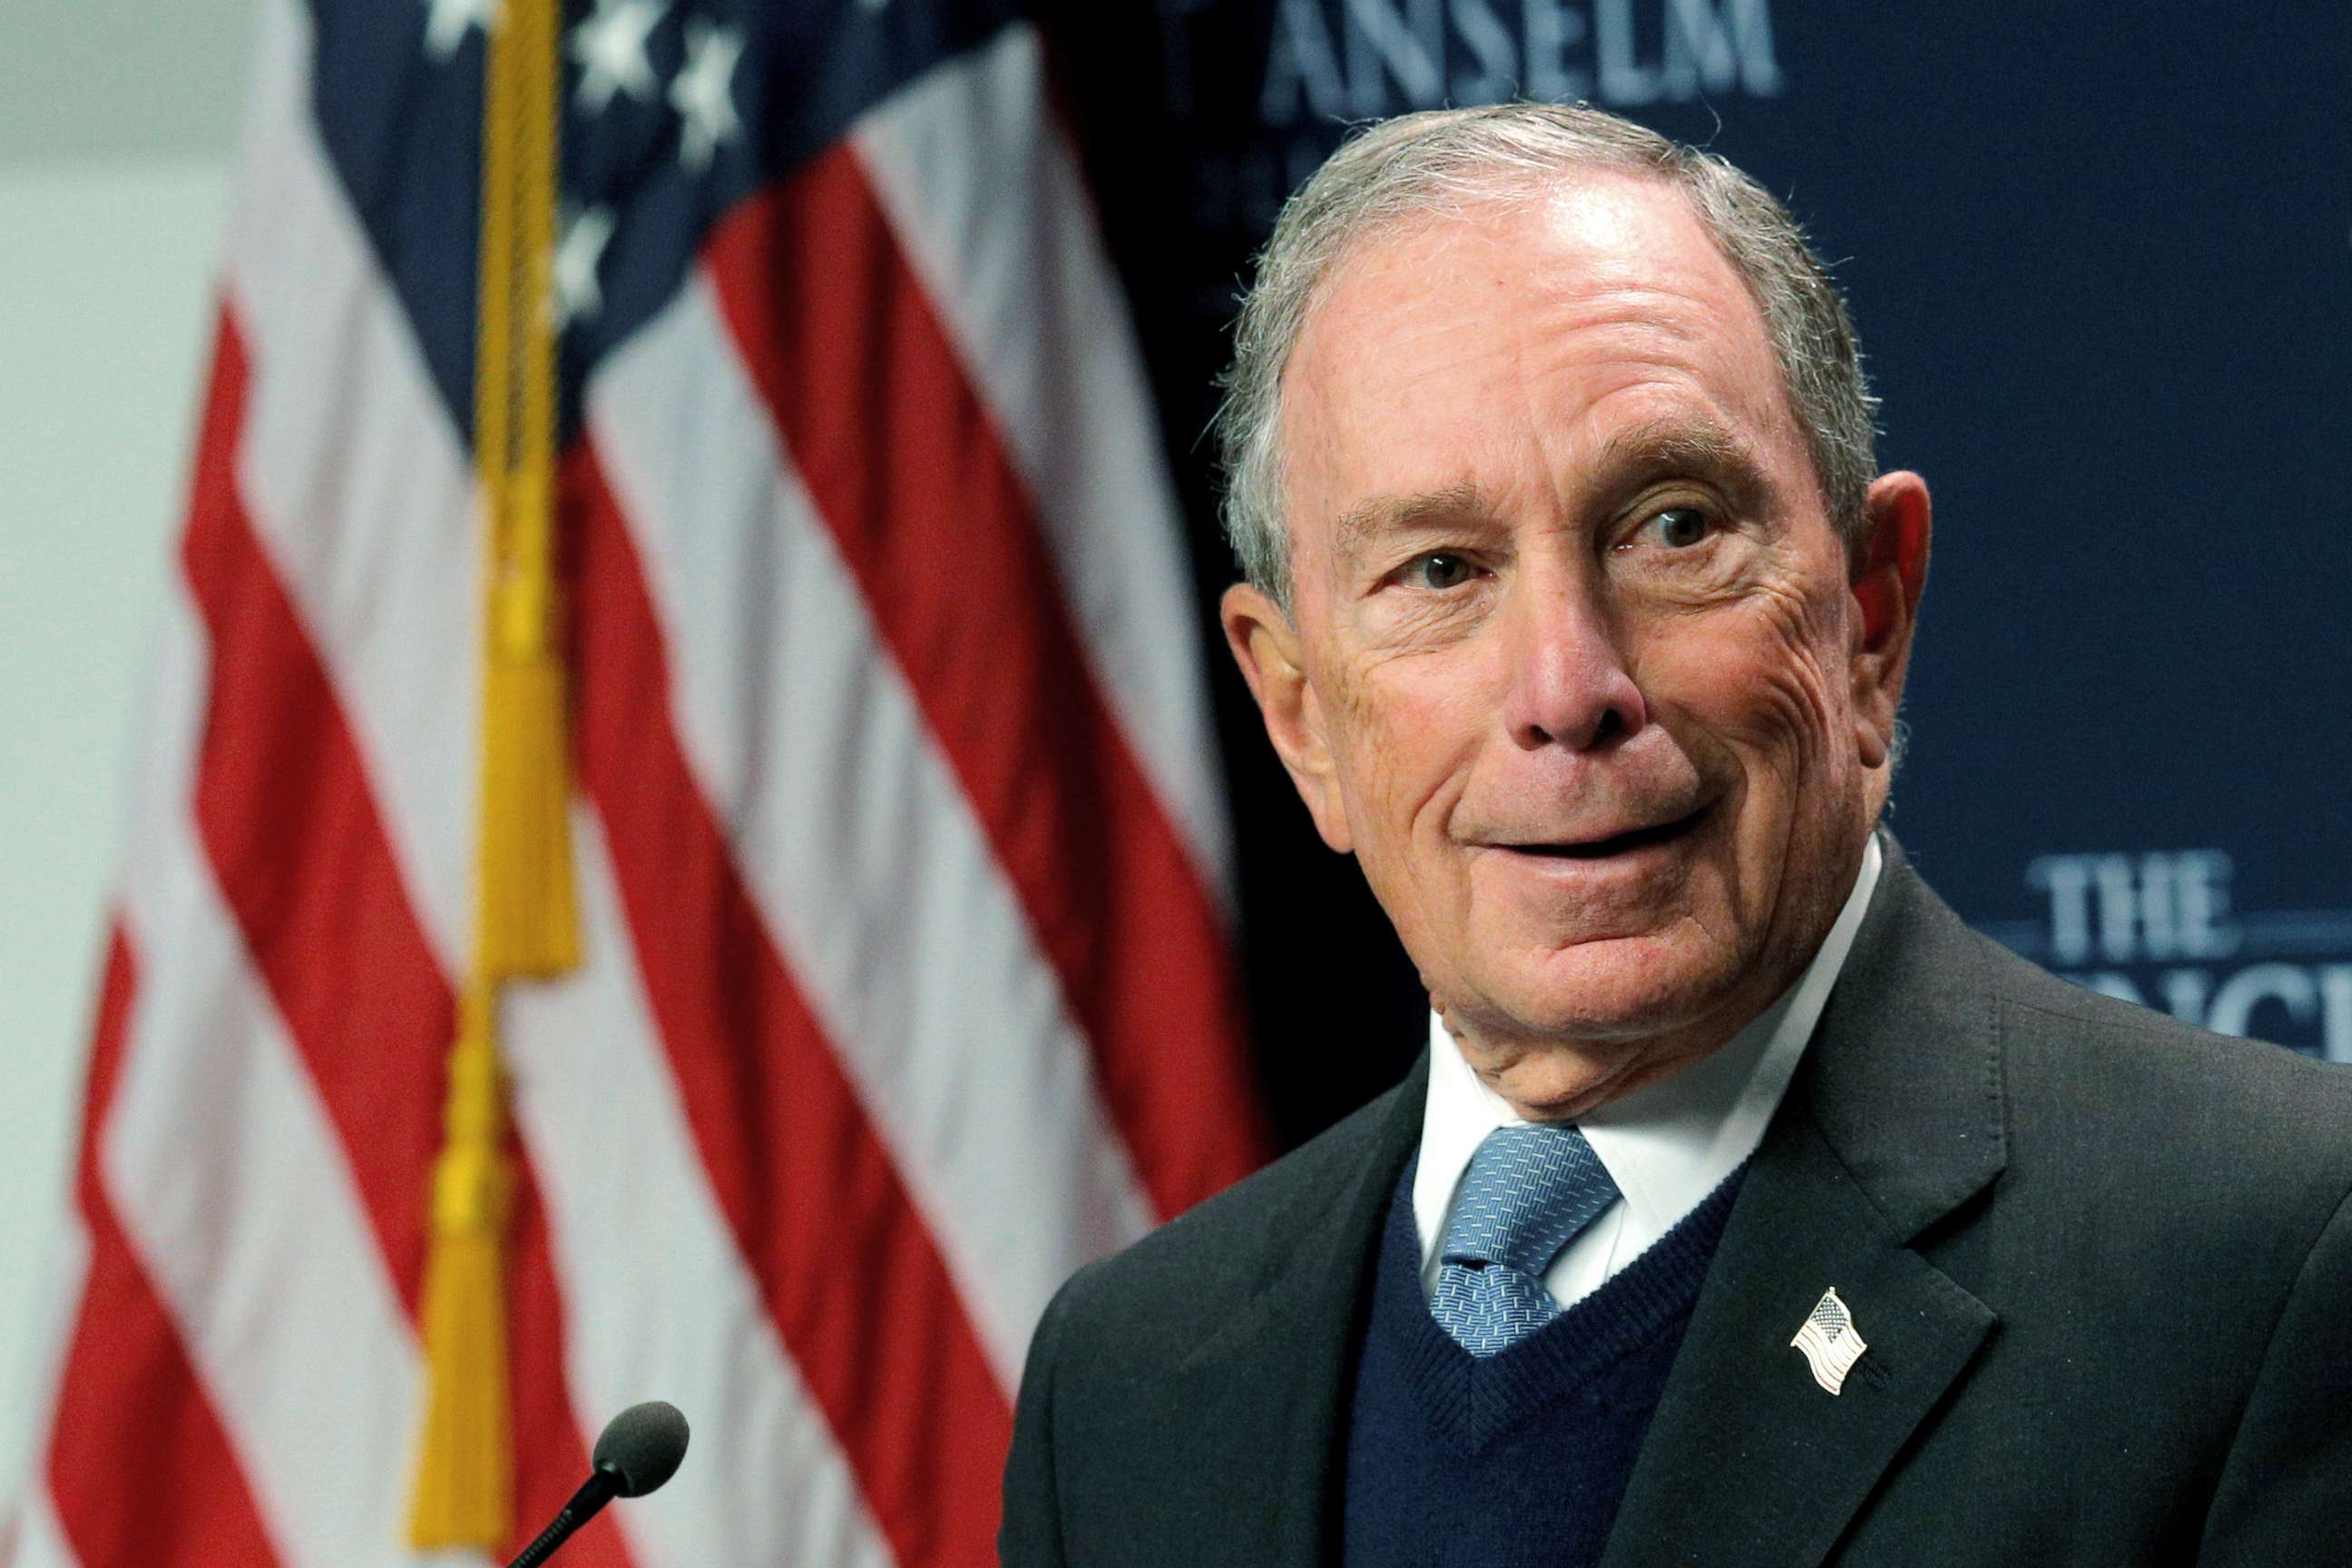 PHOTO: Former New York City Mayor Michael Bloomberg speaks at the Institute of Politics at Saint Anselm College in Manchester, N.H., Jan. 29, 2019. 